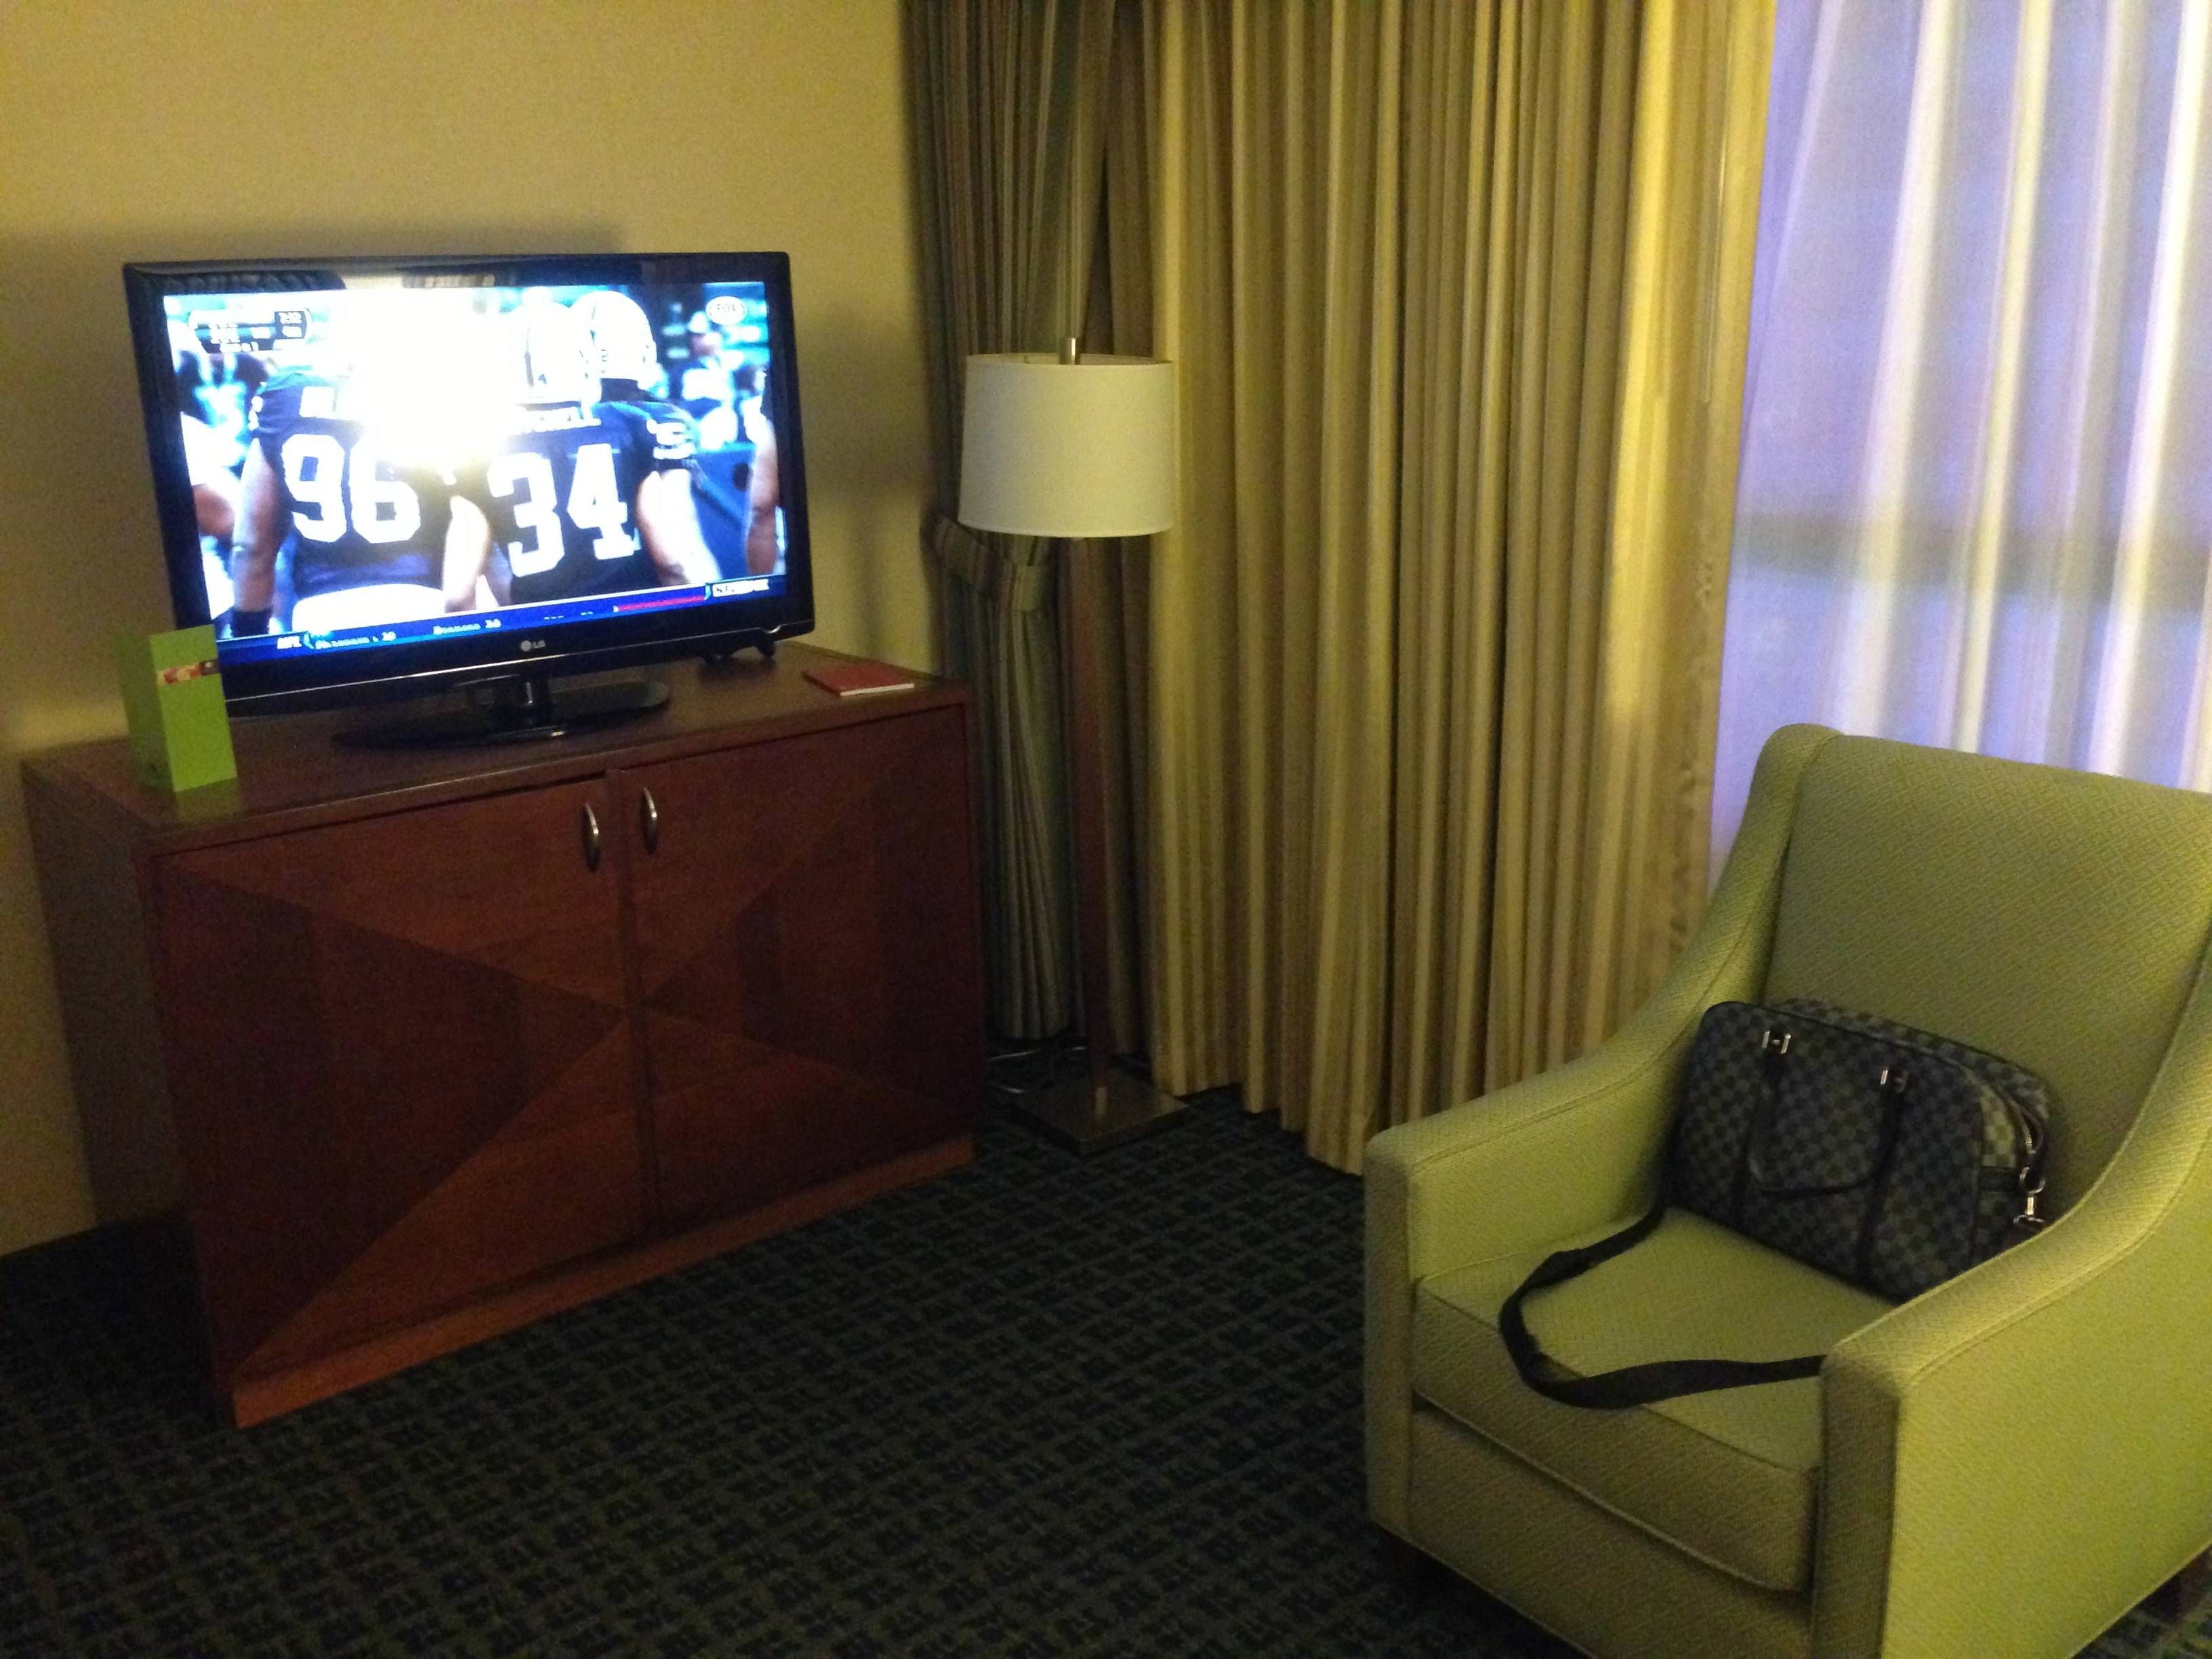 DoubleTree Times Square - Conference Suite